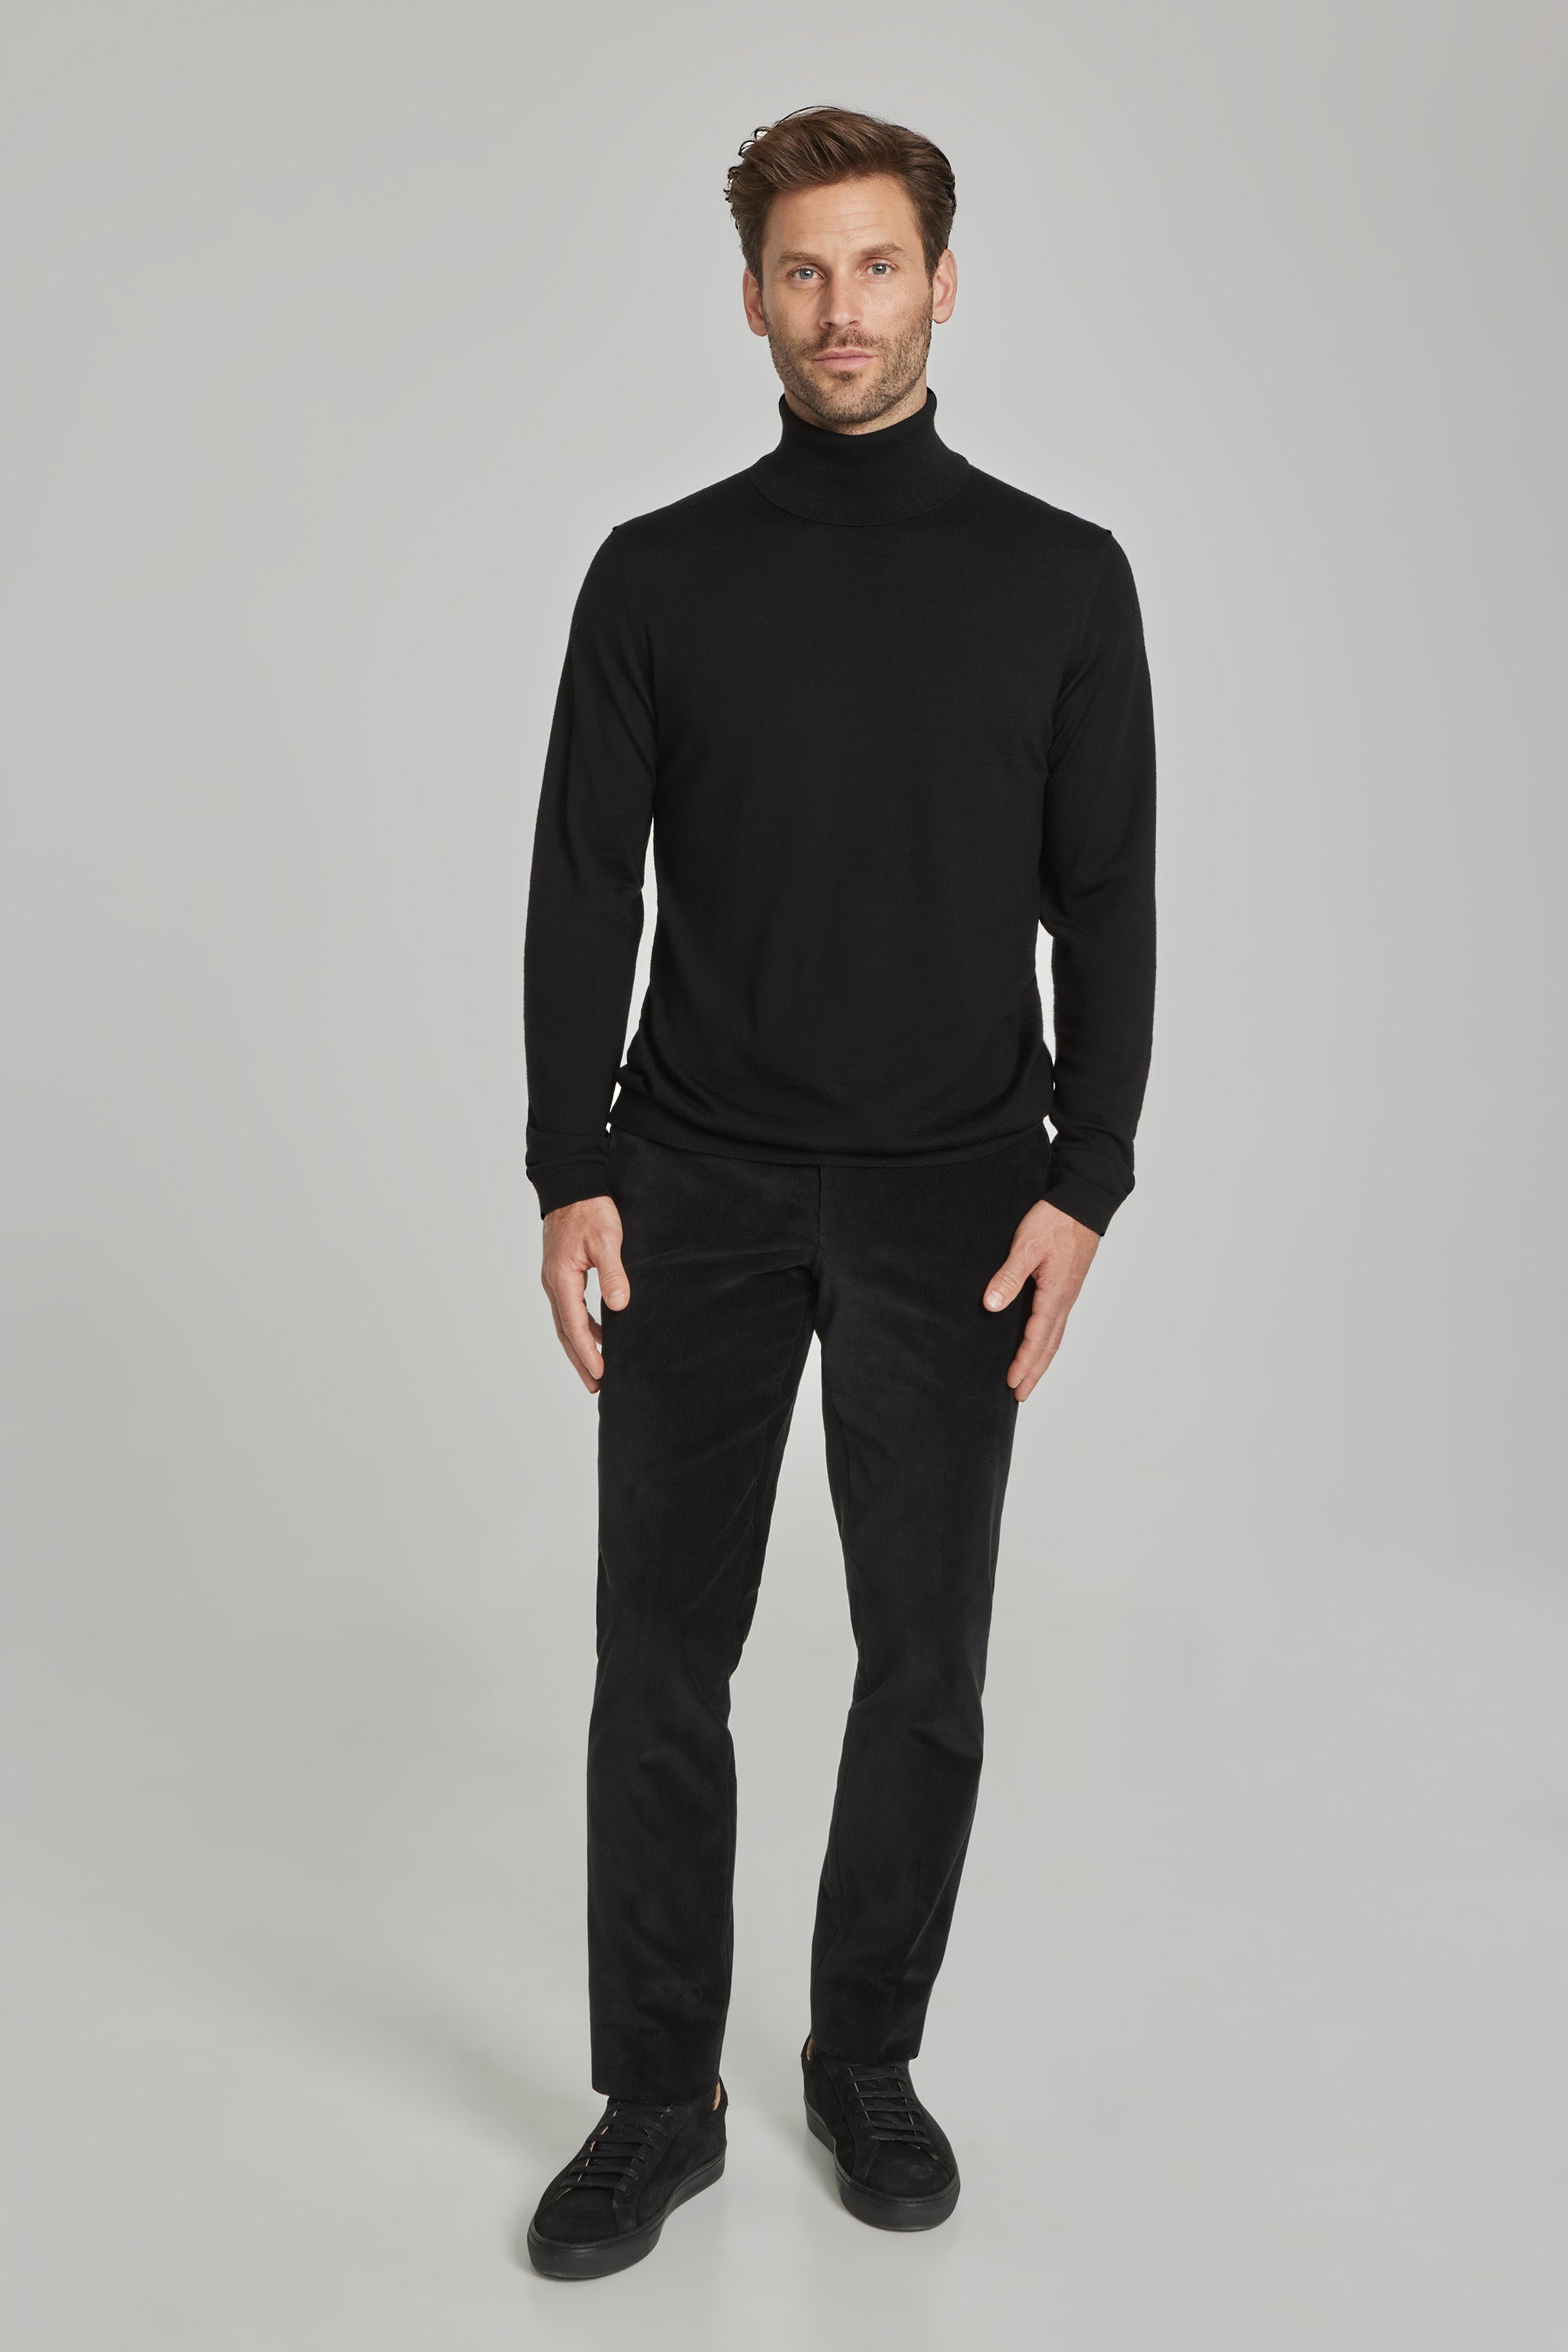 Alt view 2 Felix Solid Wool, Silk and Cashmere Turtleneck in Black